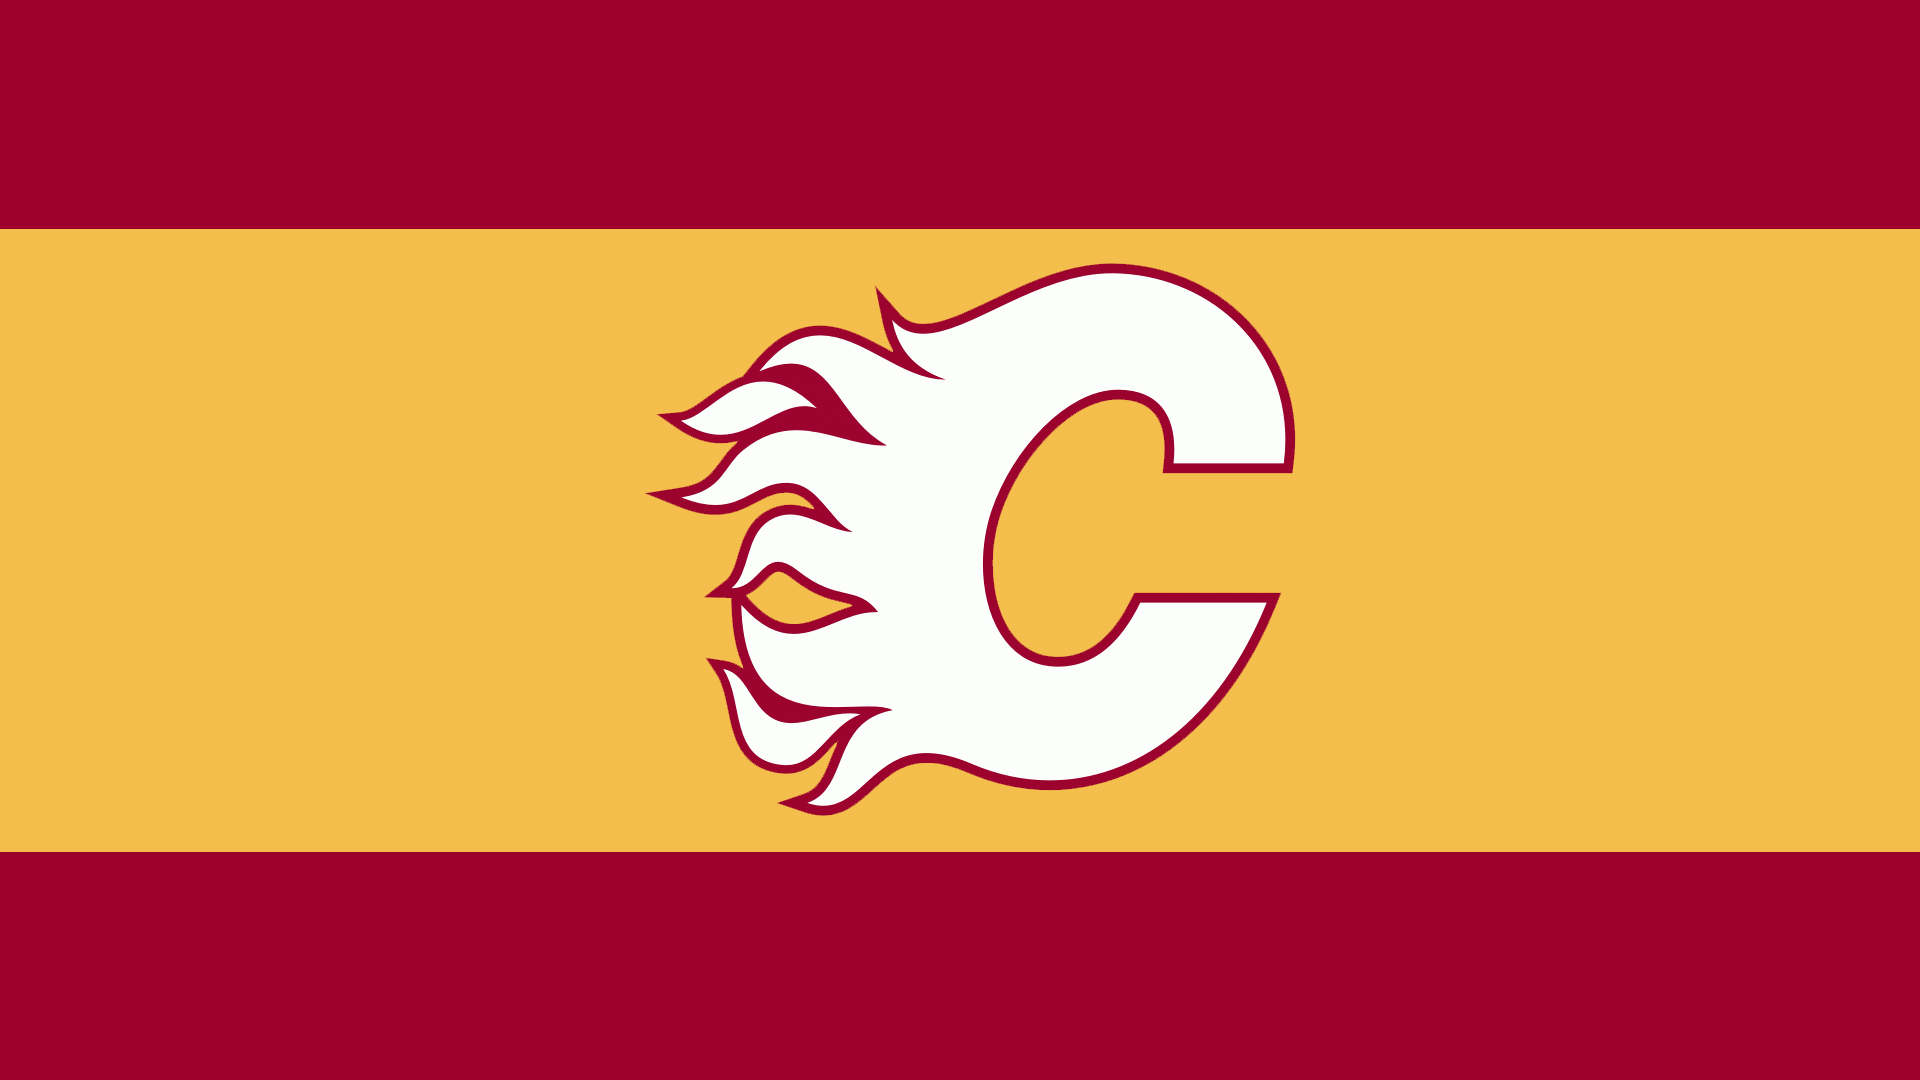 Calgary Flames Desktop Backgrounds wallpapers   General Discussions